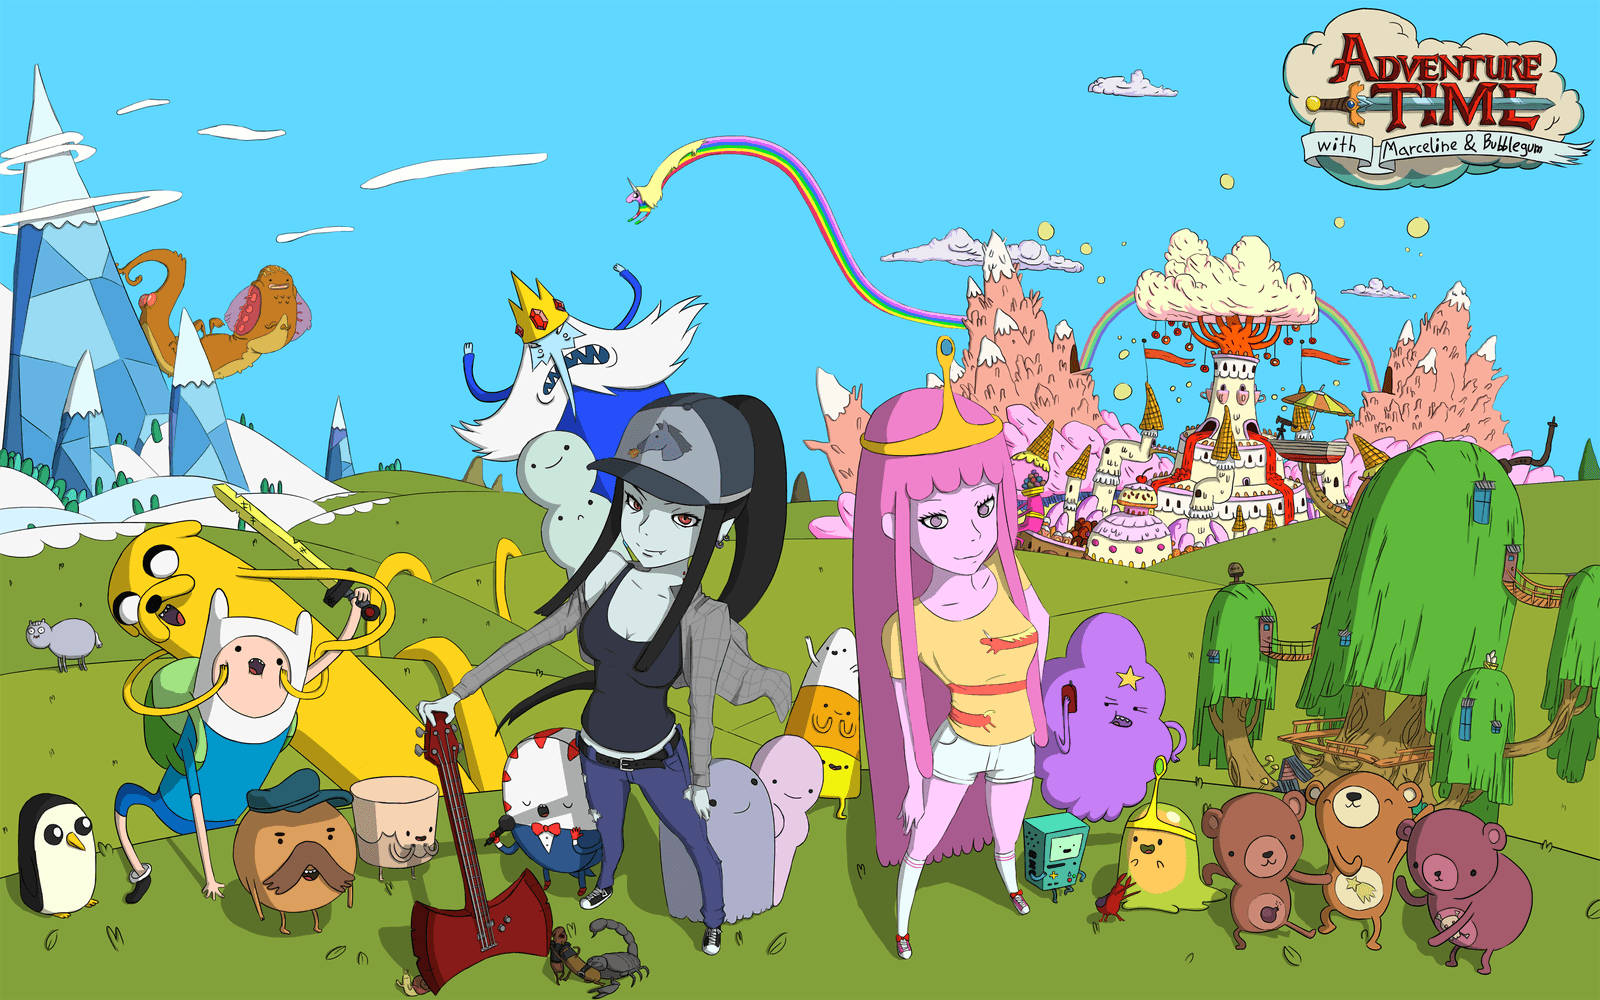 The Inhabitants Of Ooo Live In A Colorful And Whimsical World Of Adventure Time Wallpaper